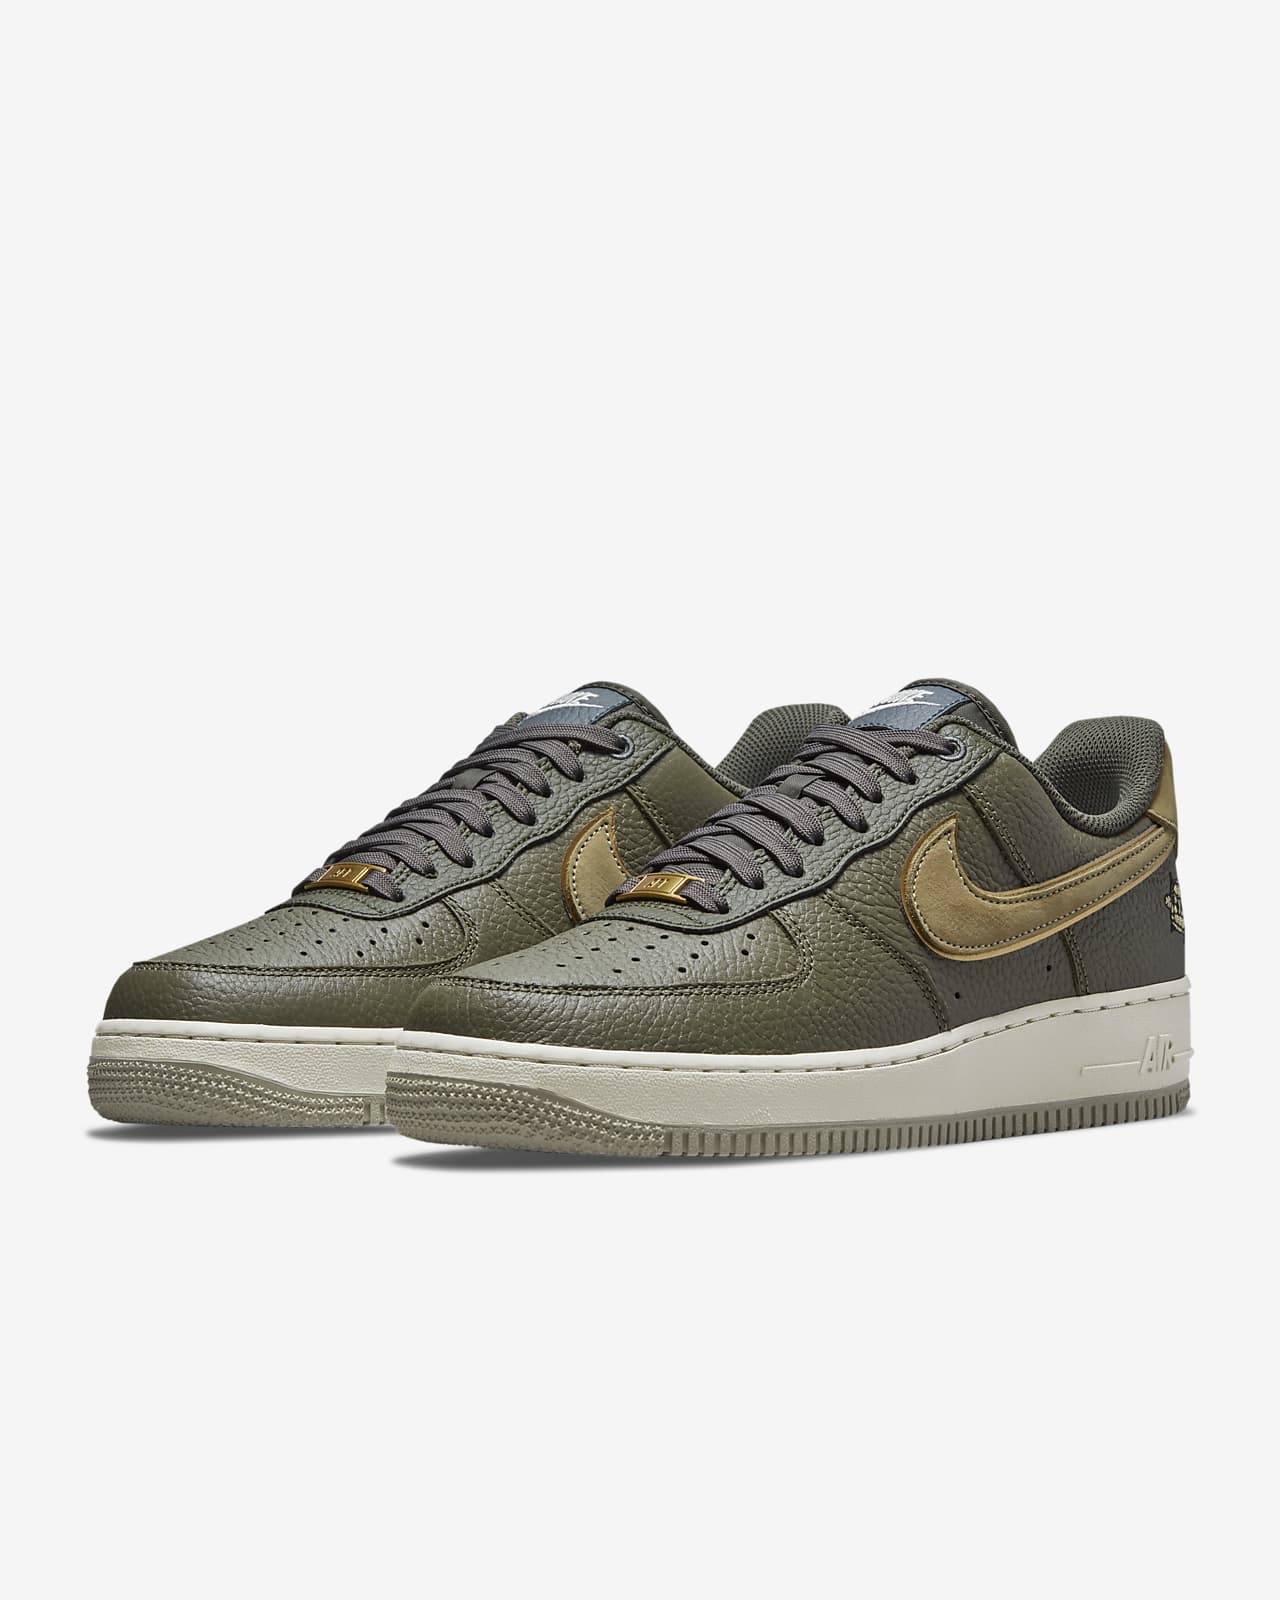 Nike Air Force 1 AF1 Camo Fashion Sneakers Unisex Running Shoes